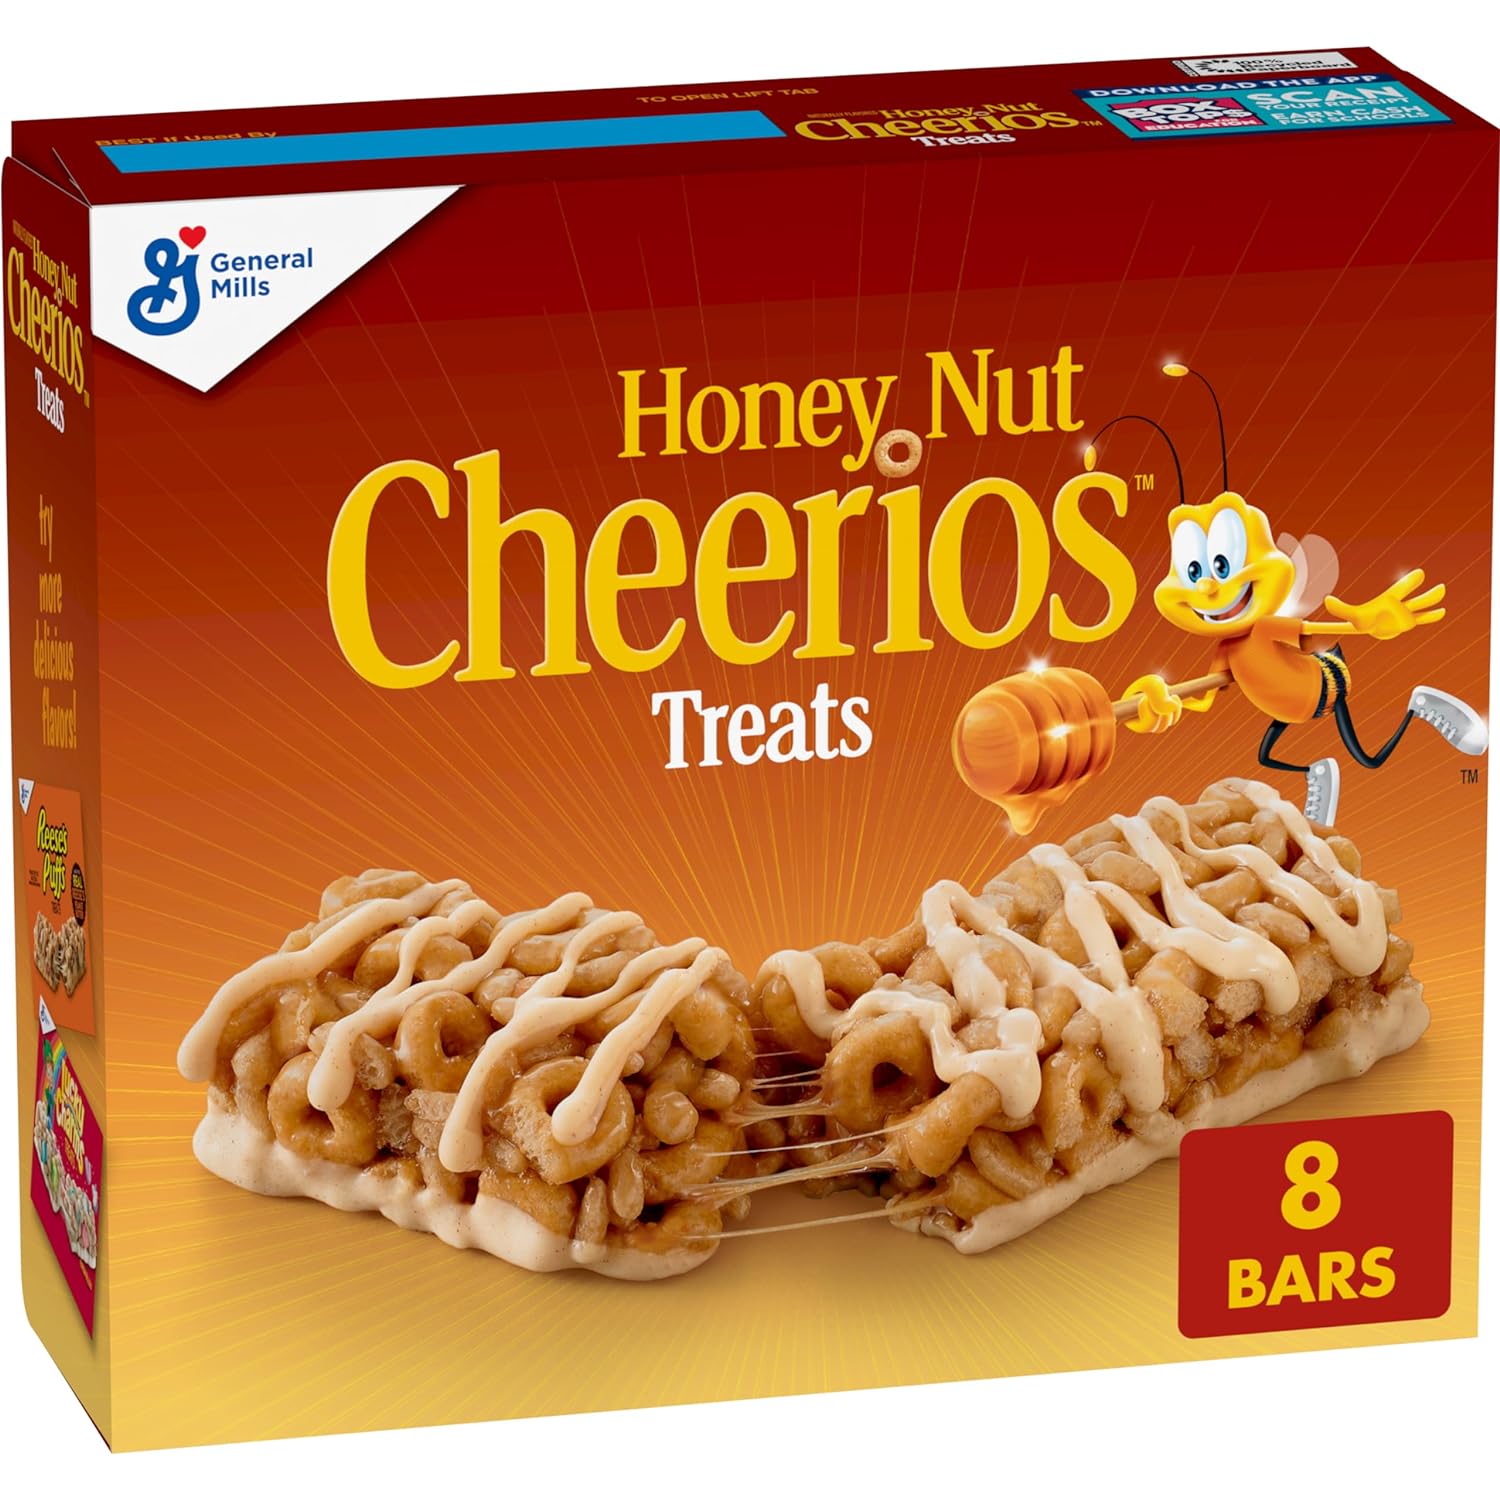 8-Count Breakfast Cereal Treat Bars: Honey Nut Cheerios $1.90 w/ S&S, Cinnamon Toast Crunch $2 + Free Shipping w/ Prime or on orders over $35